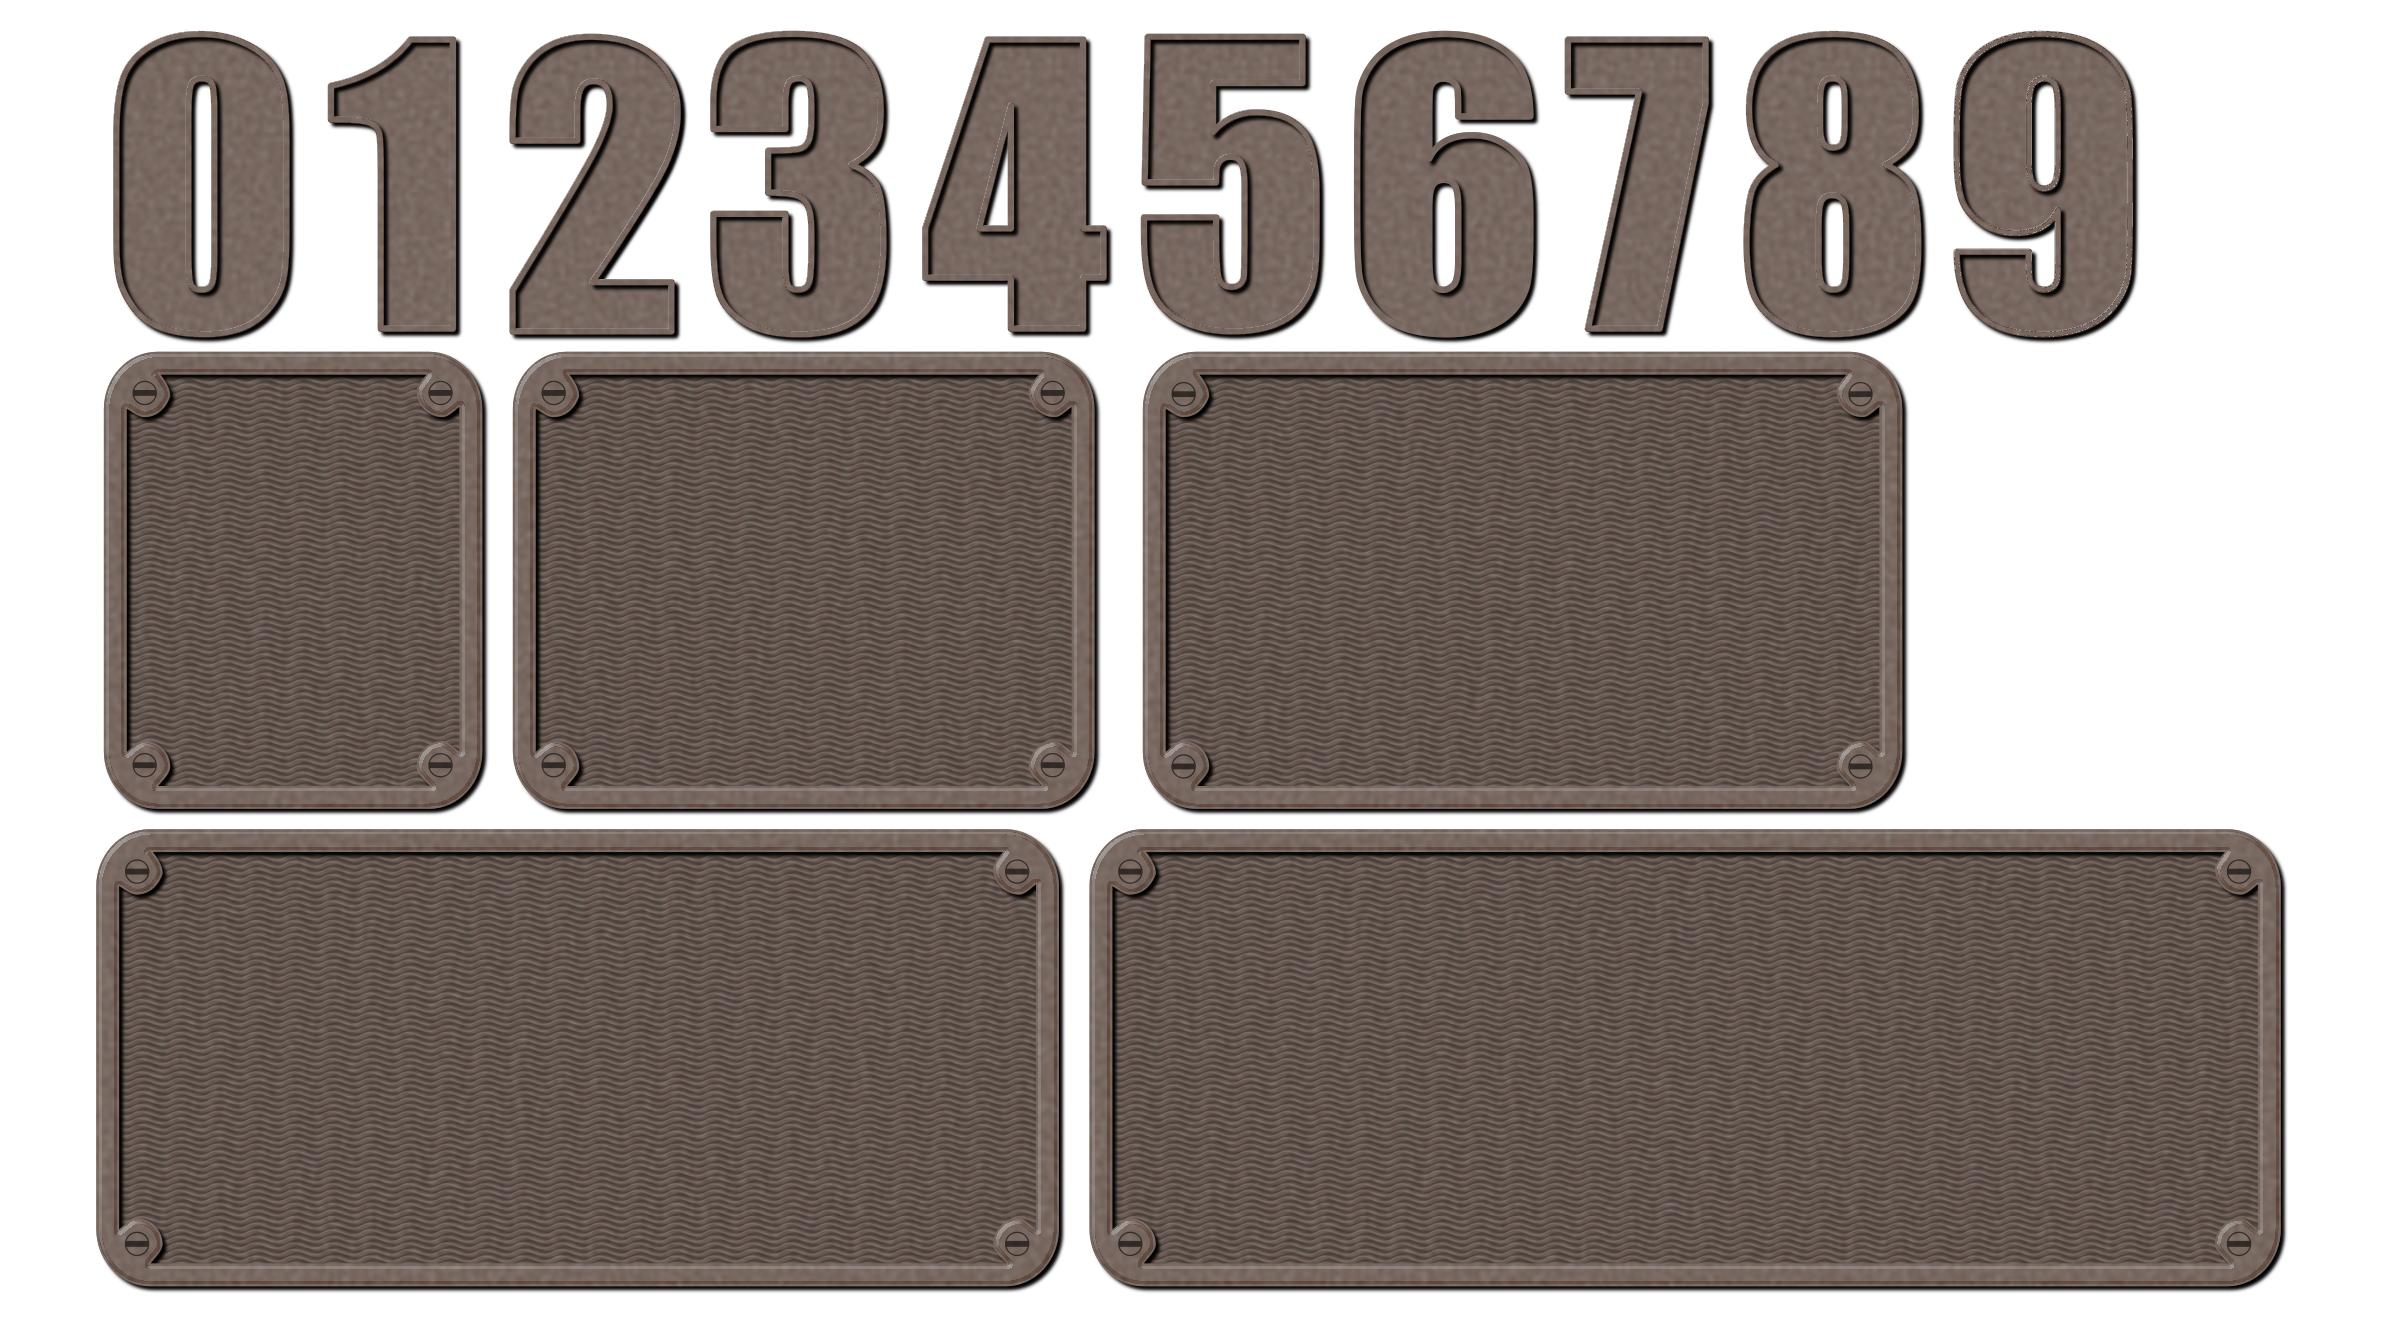 Metal Numbers and Backgrounds PNG icons